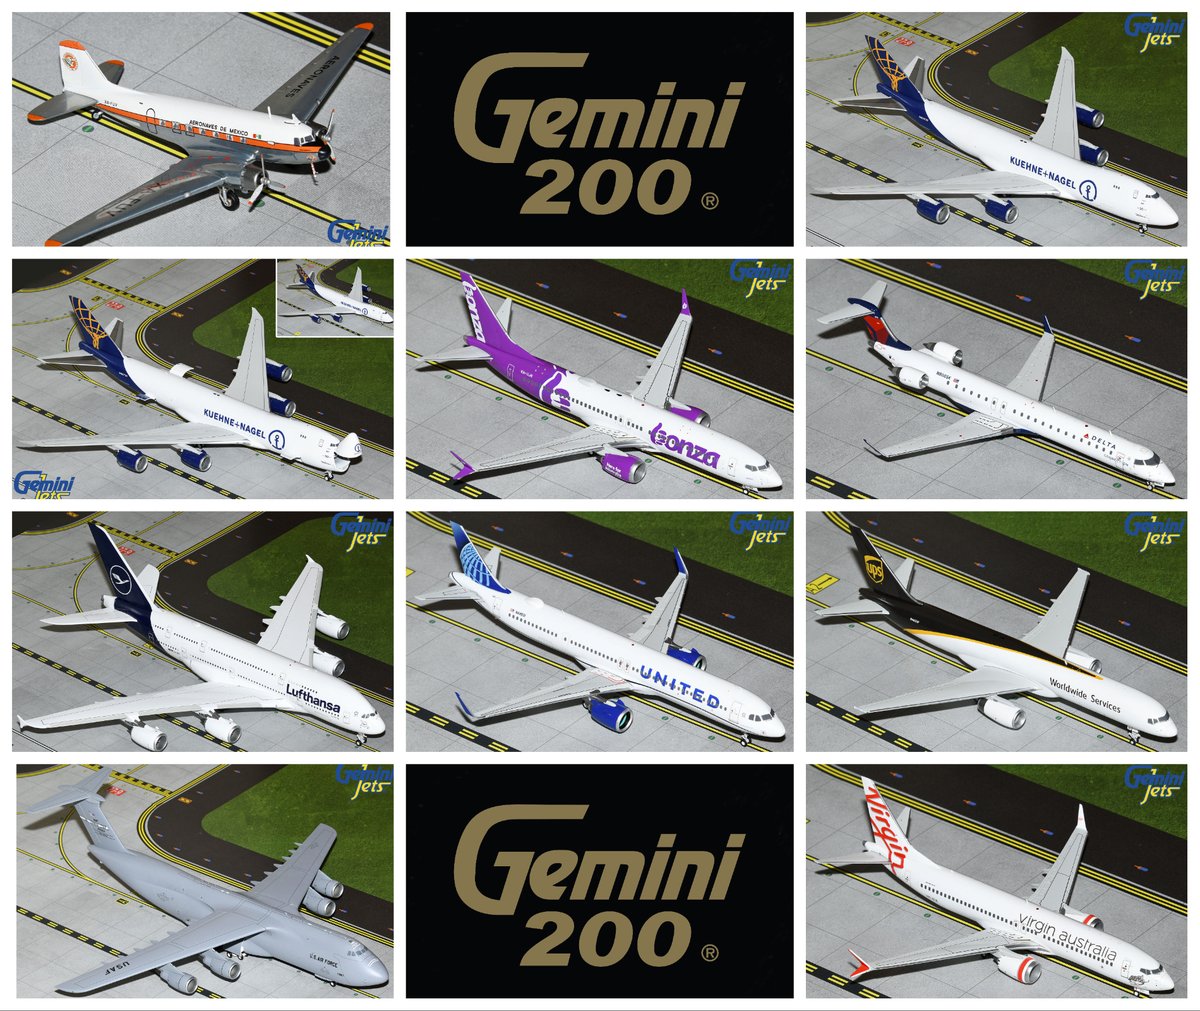 At last, the Gemini200 1:200-scale January 2024 releases have arrived. Have you pre-ordered yours? See the list of global GeminiJets retailers at geminijets.com/retailers ✈️ #GeminiJetsModels #Gemini200